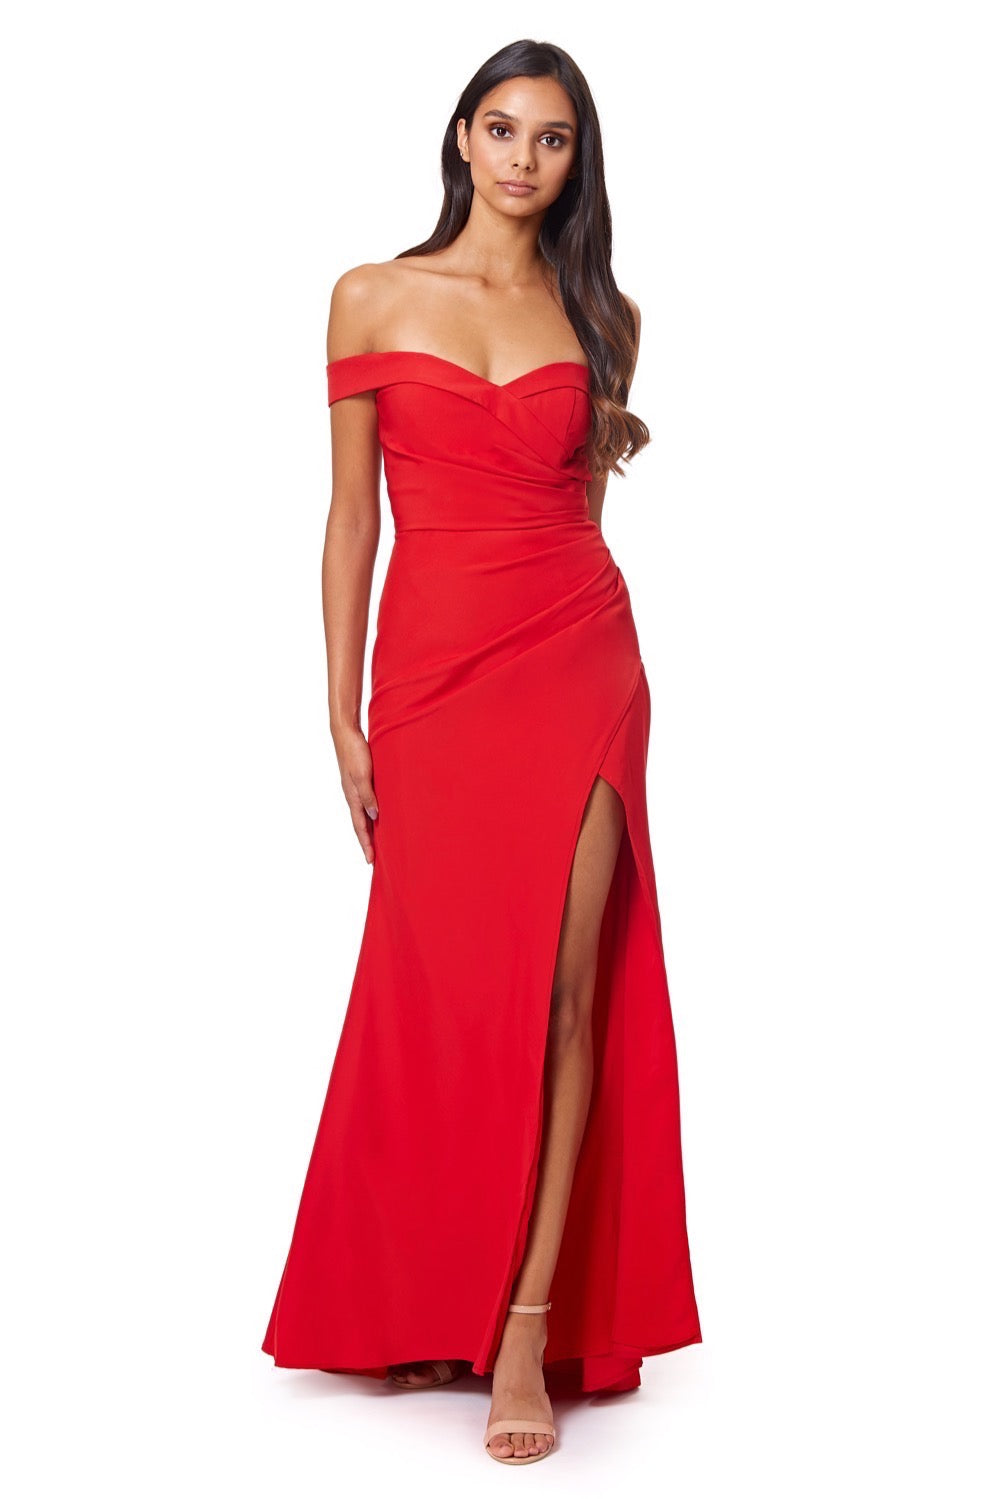 Bluebell Bardot Maxi Dress With Thigh Split And Button Back, UK 12 / US 8 / EU 40 / Red